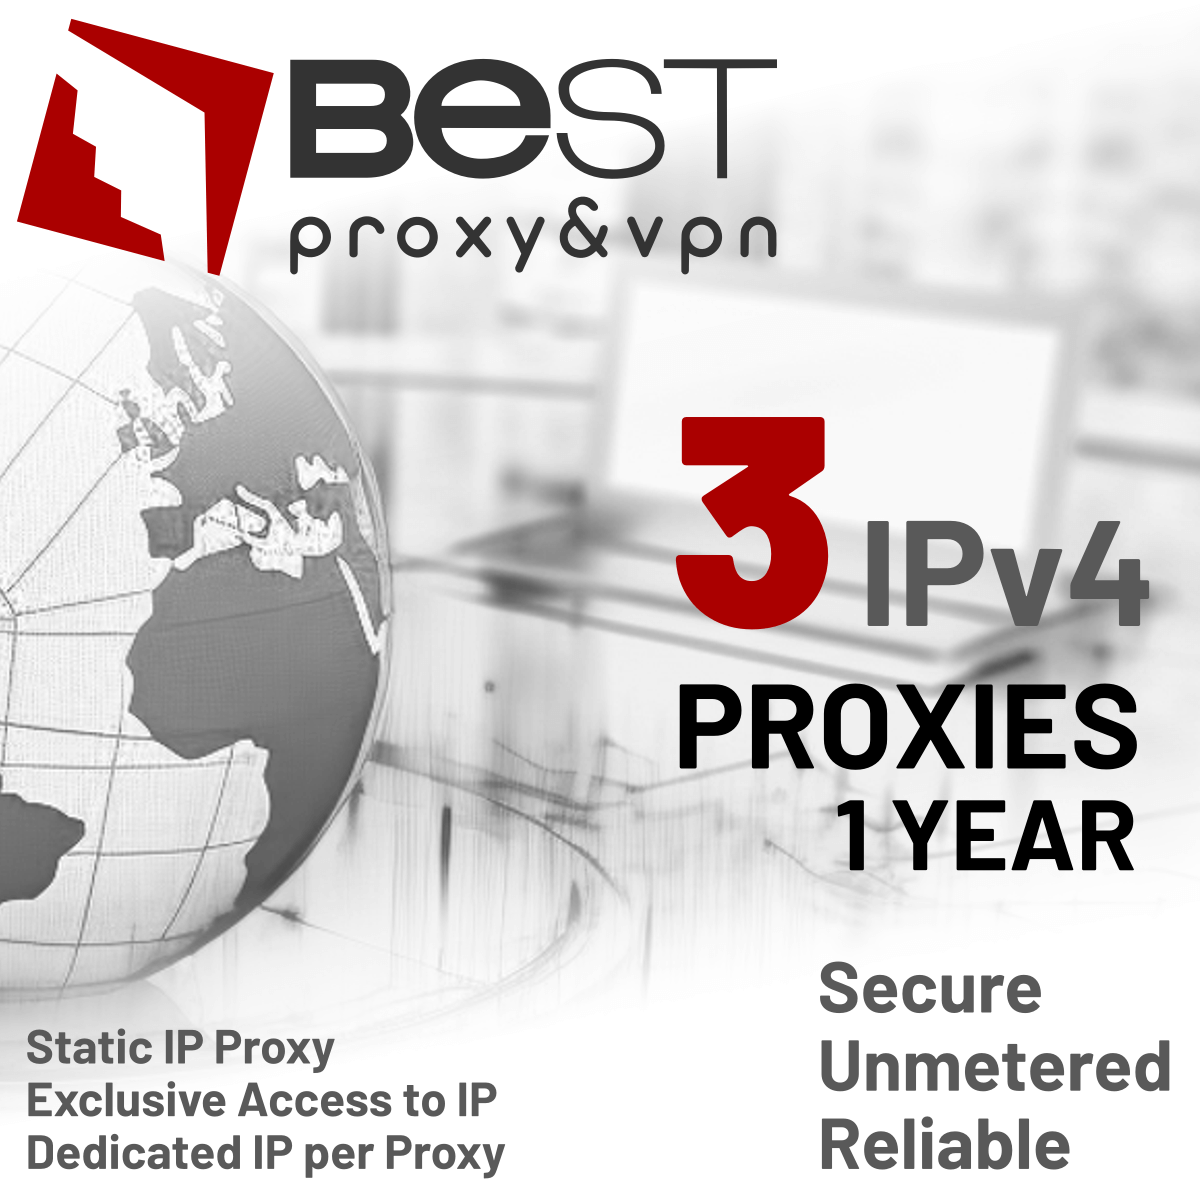 3 Private Proxies for 1 Year